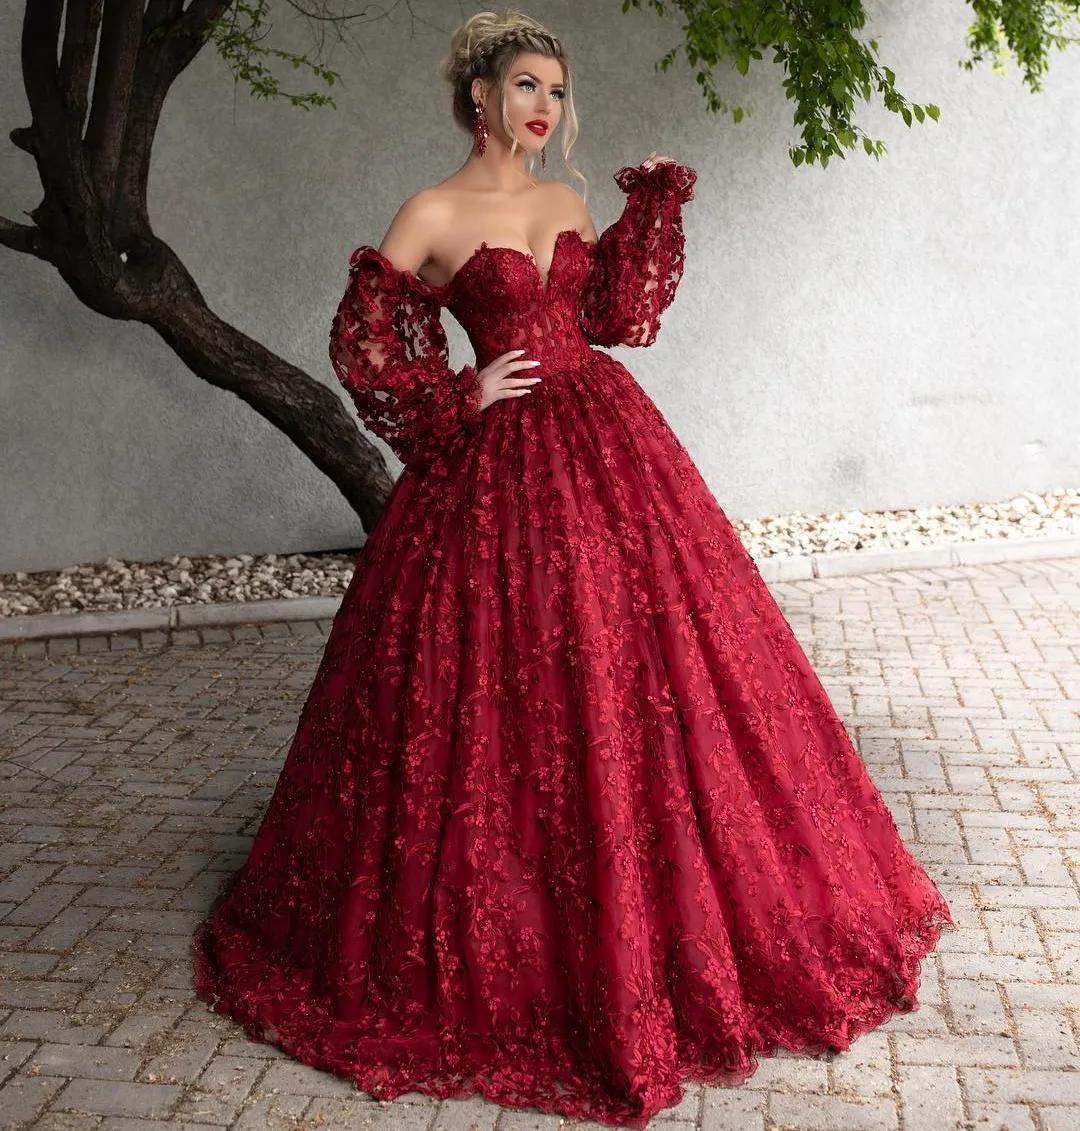 Enchanting red rose floral lace applique beaded princess wedding ball gown  dress with chapel train